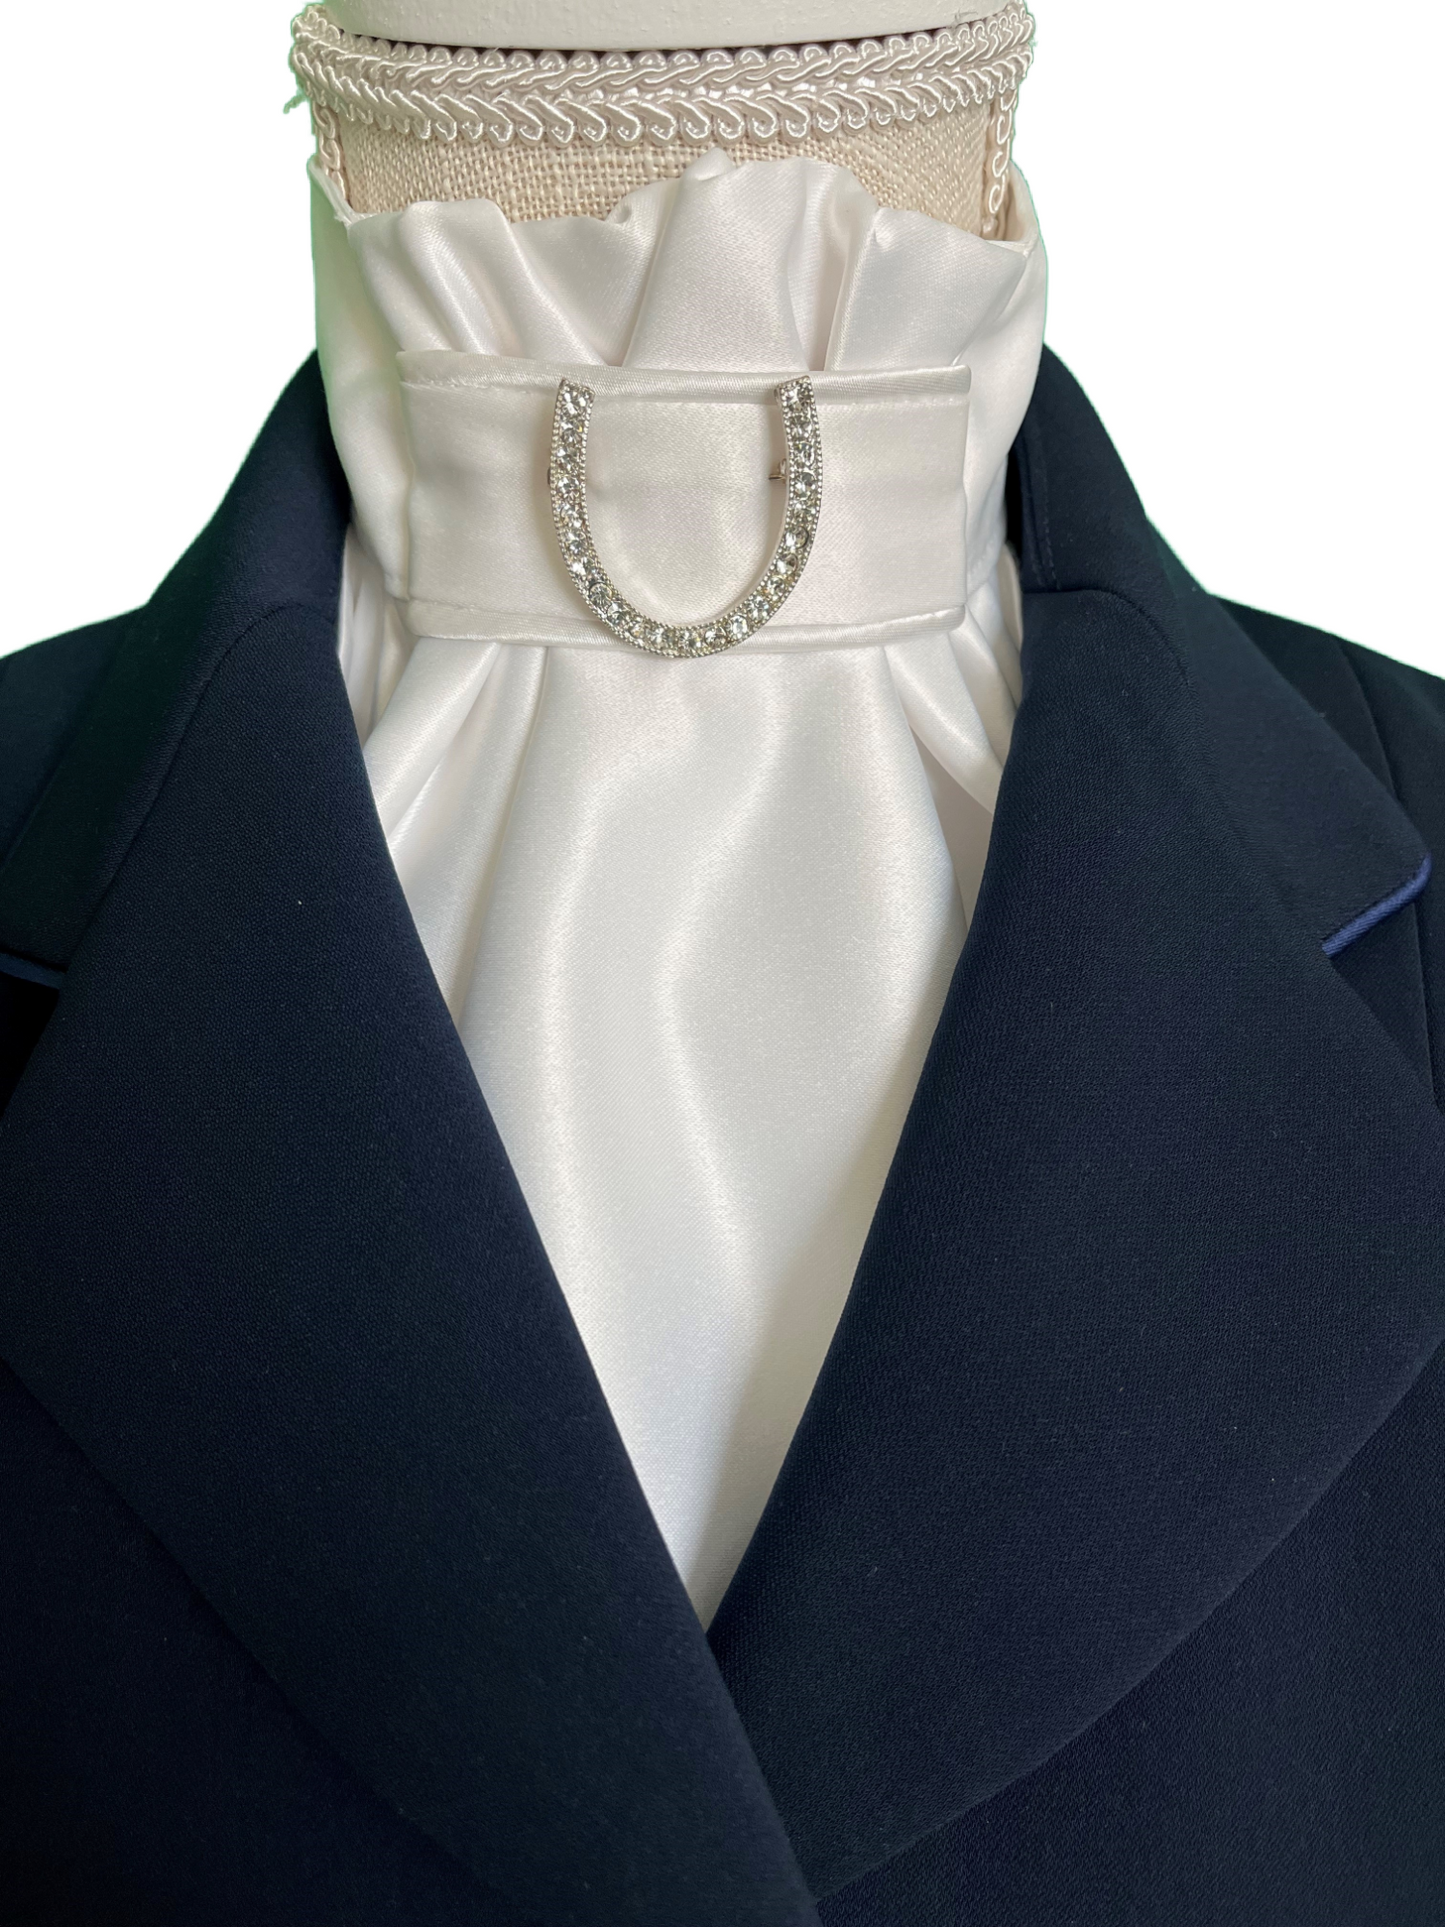 White Satin Stock Tie with Silver Horseshoe Brooch